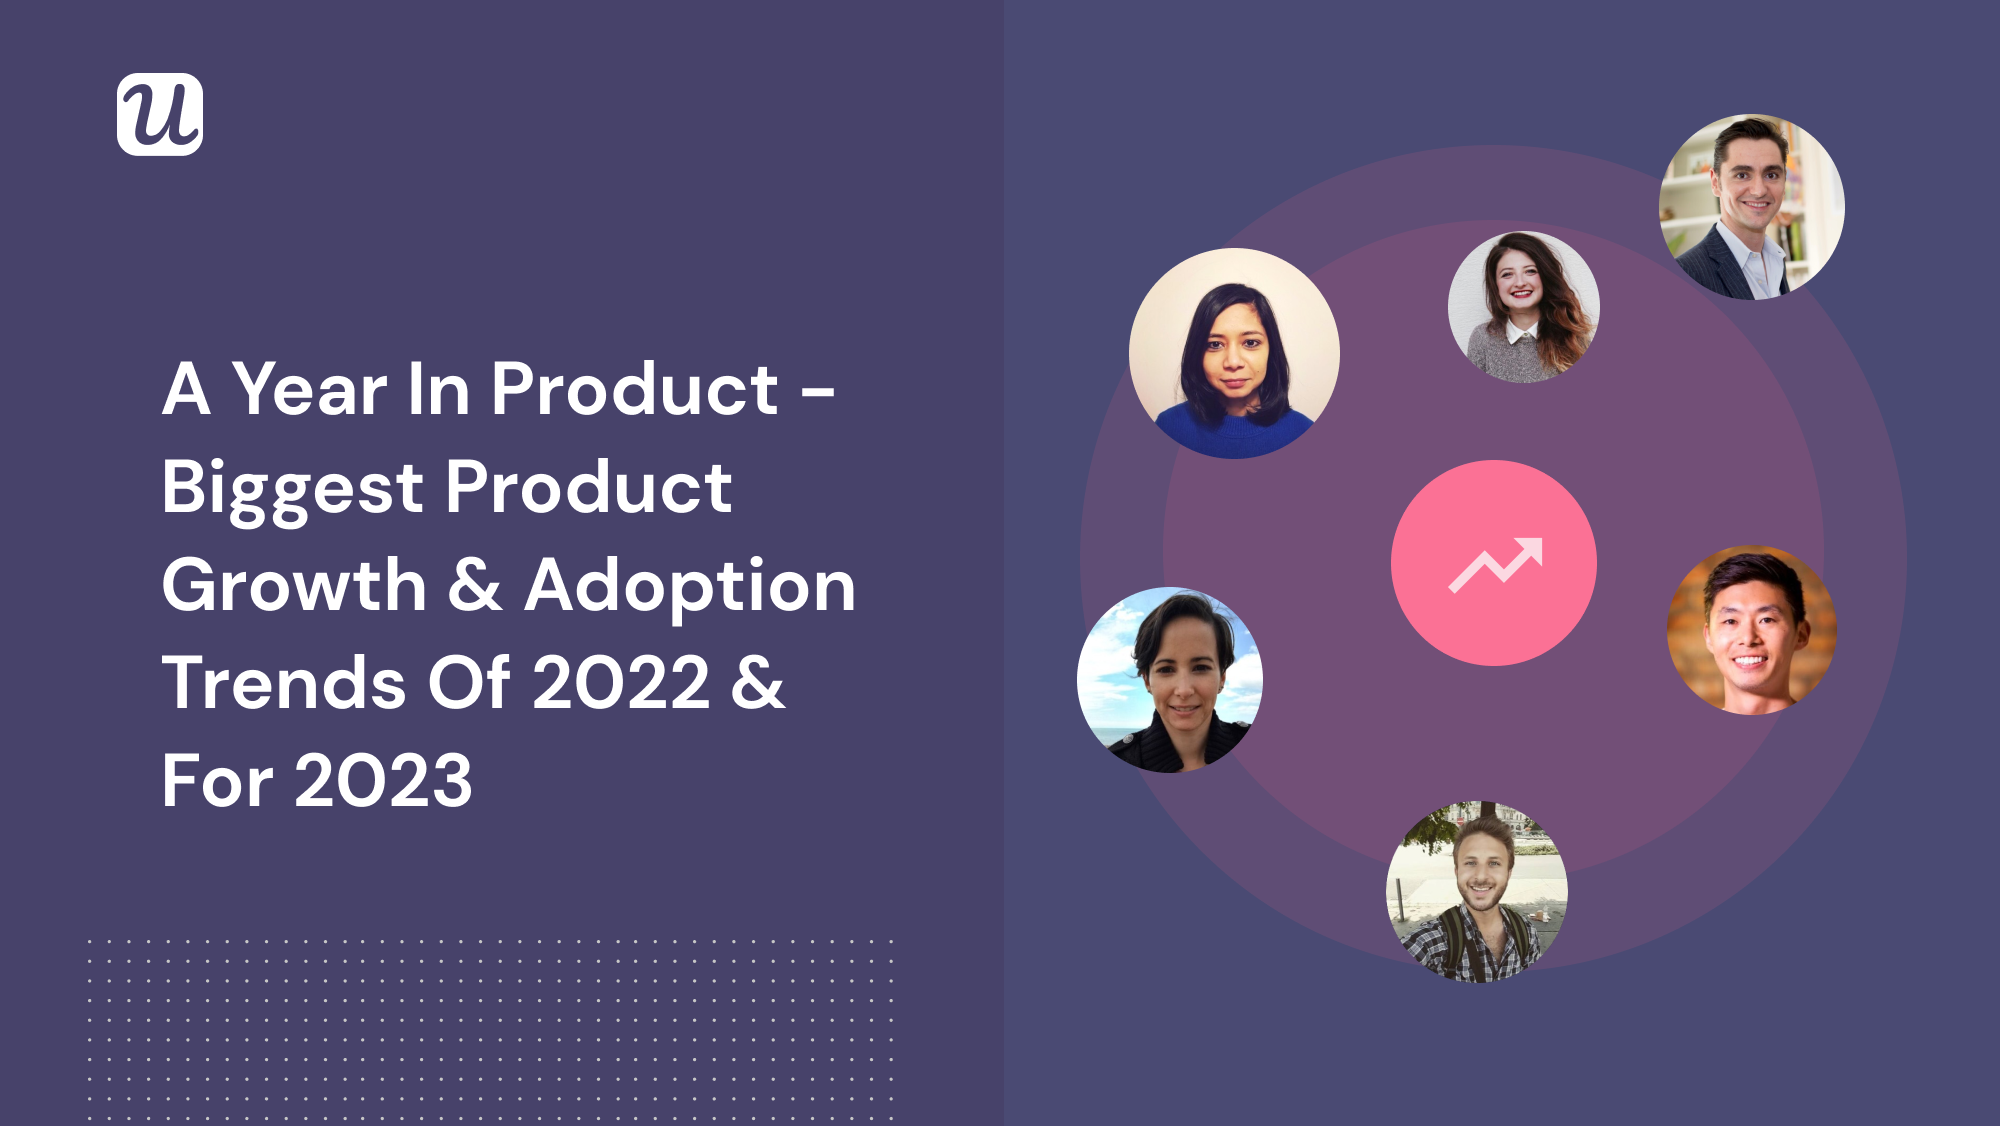 The Greatest Product Growth & Adoption Trends